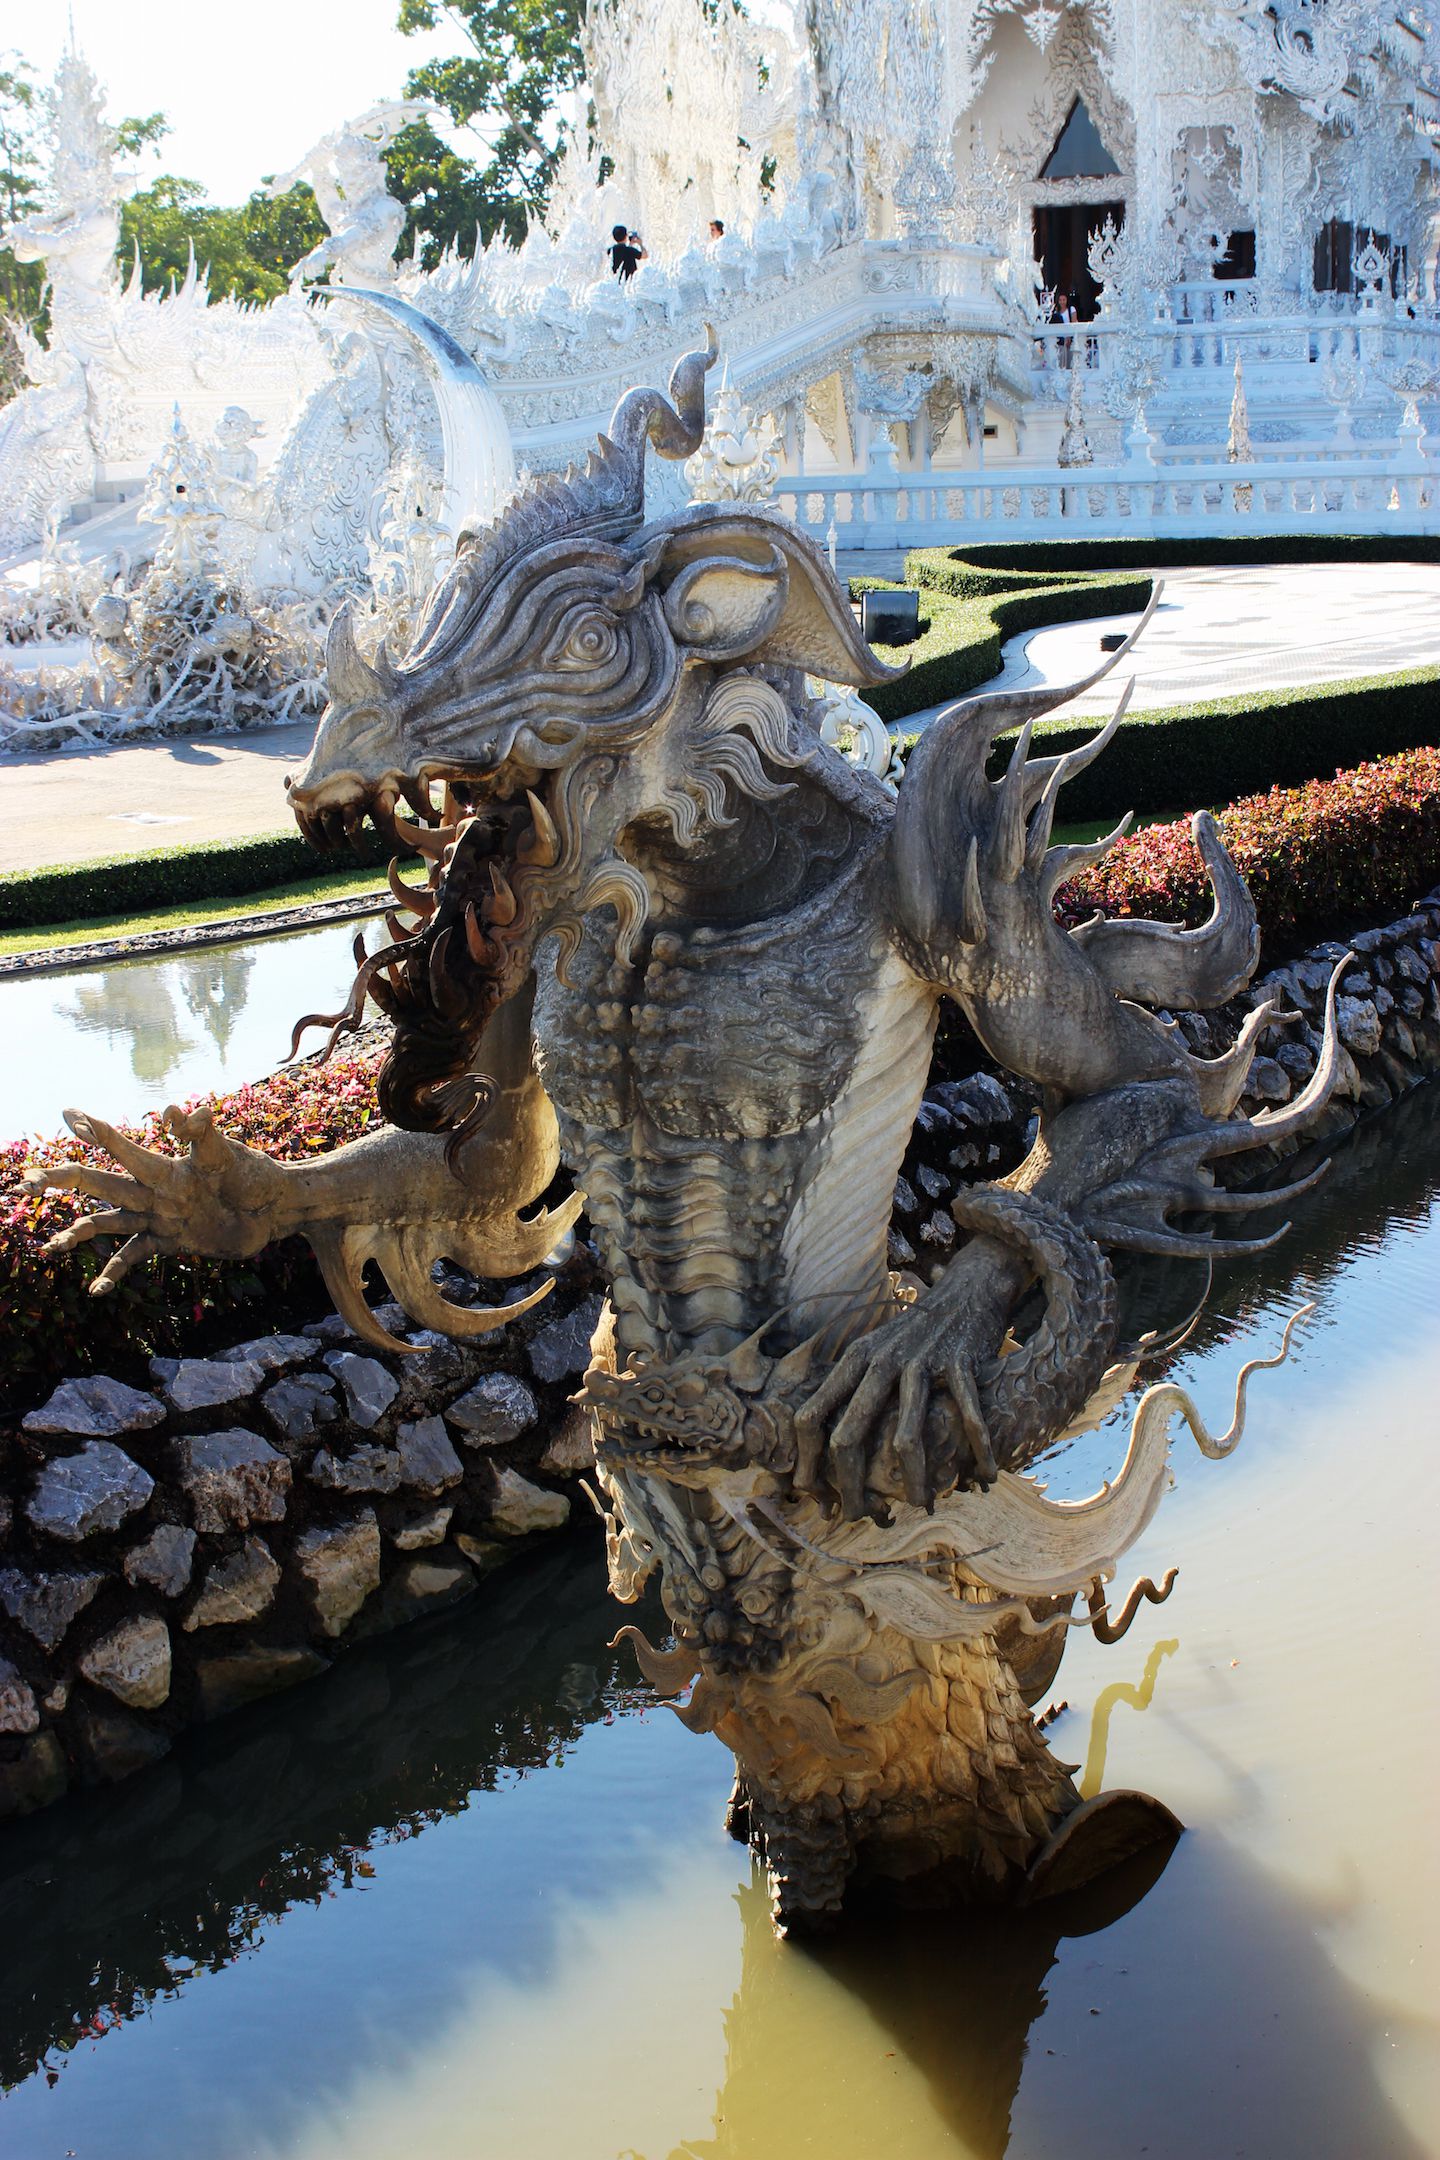 Monster statue in the pond of the White Temple in Chiang Rai